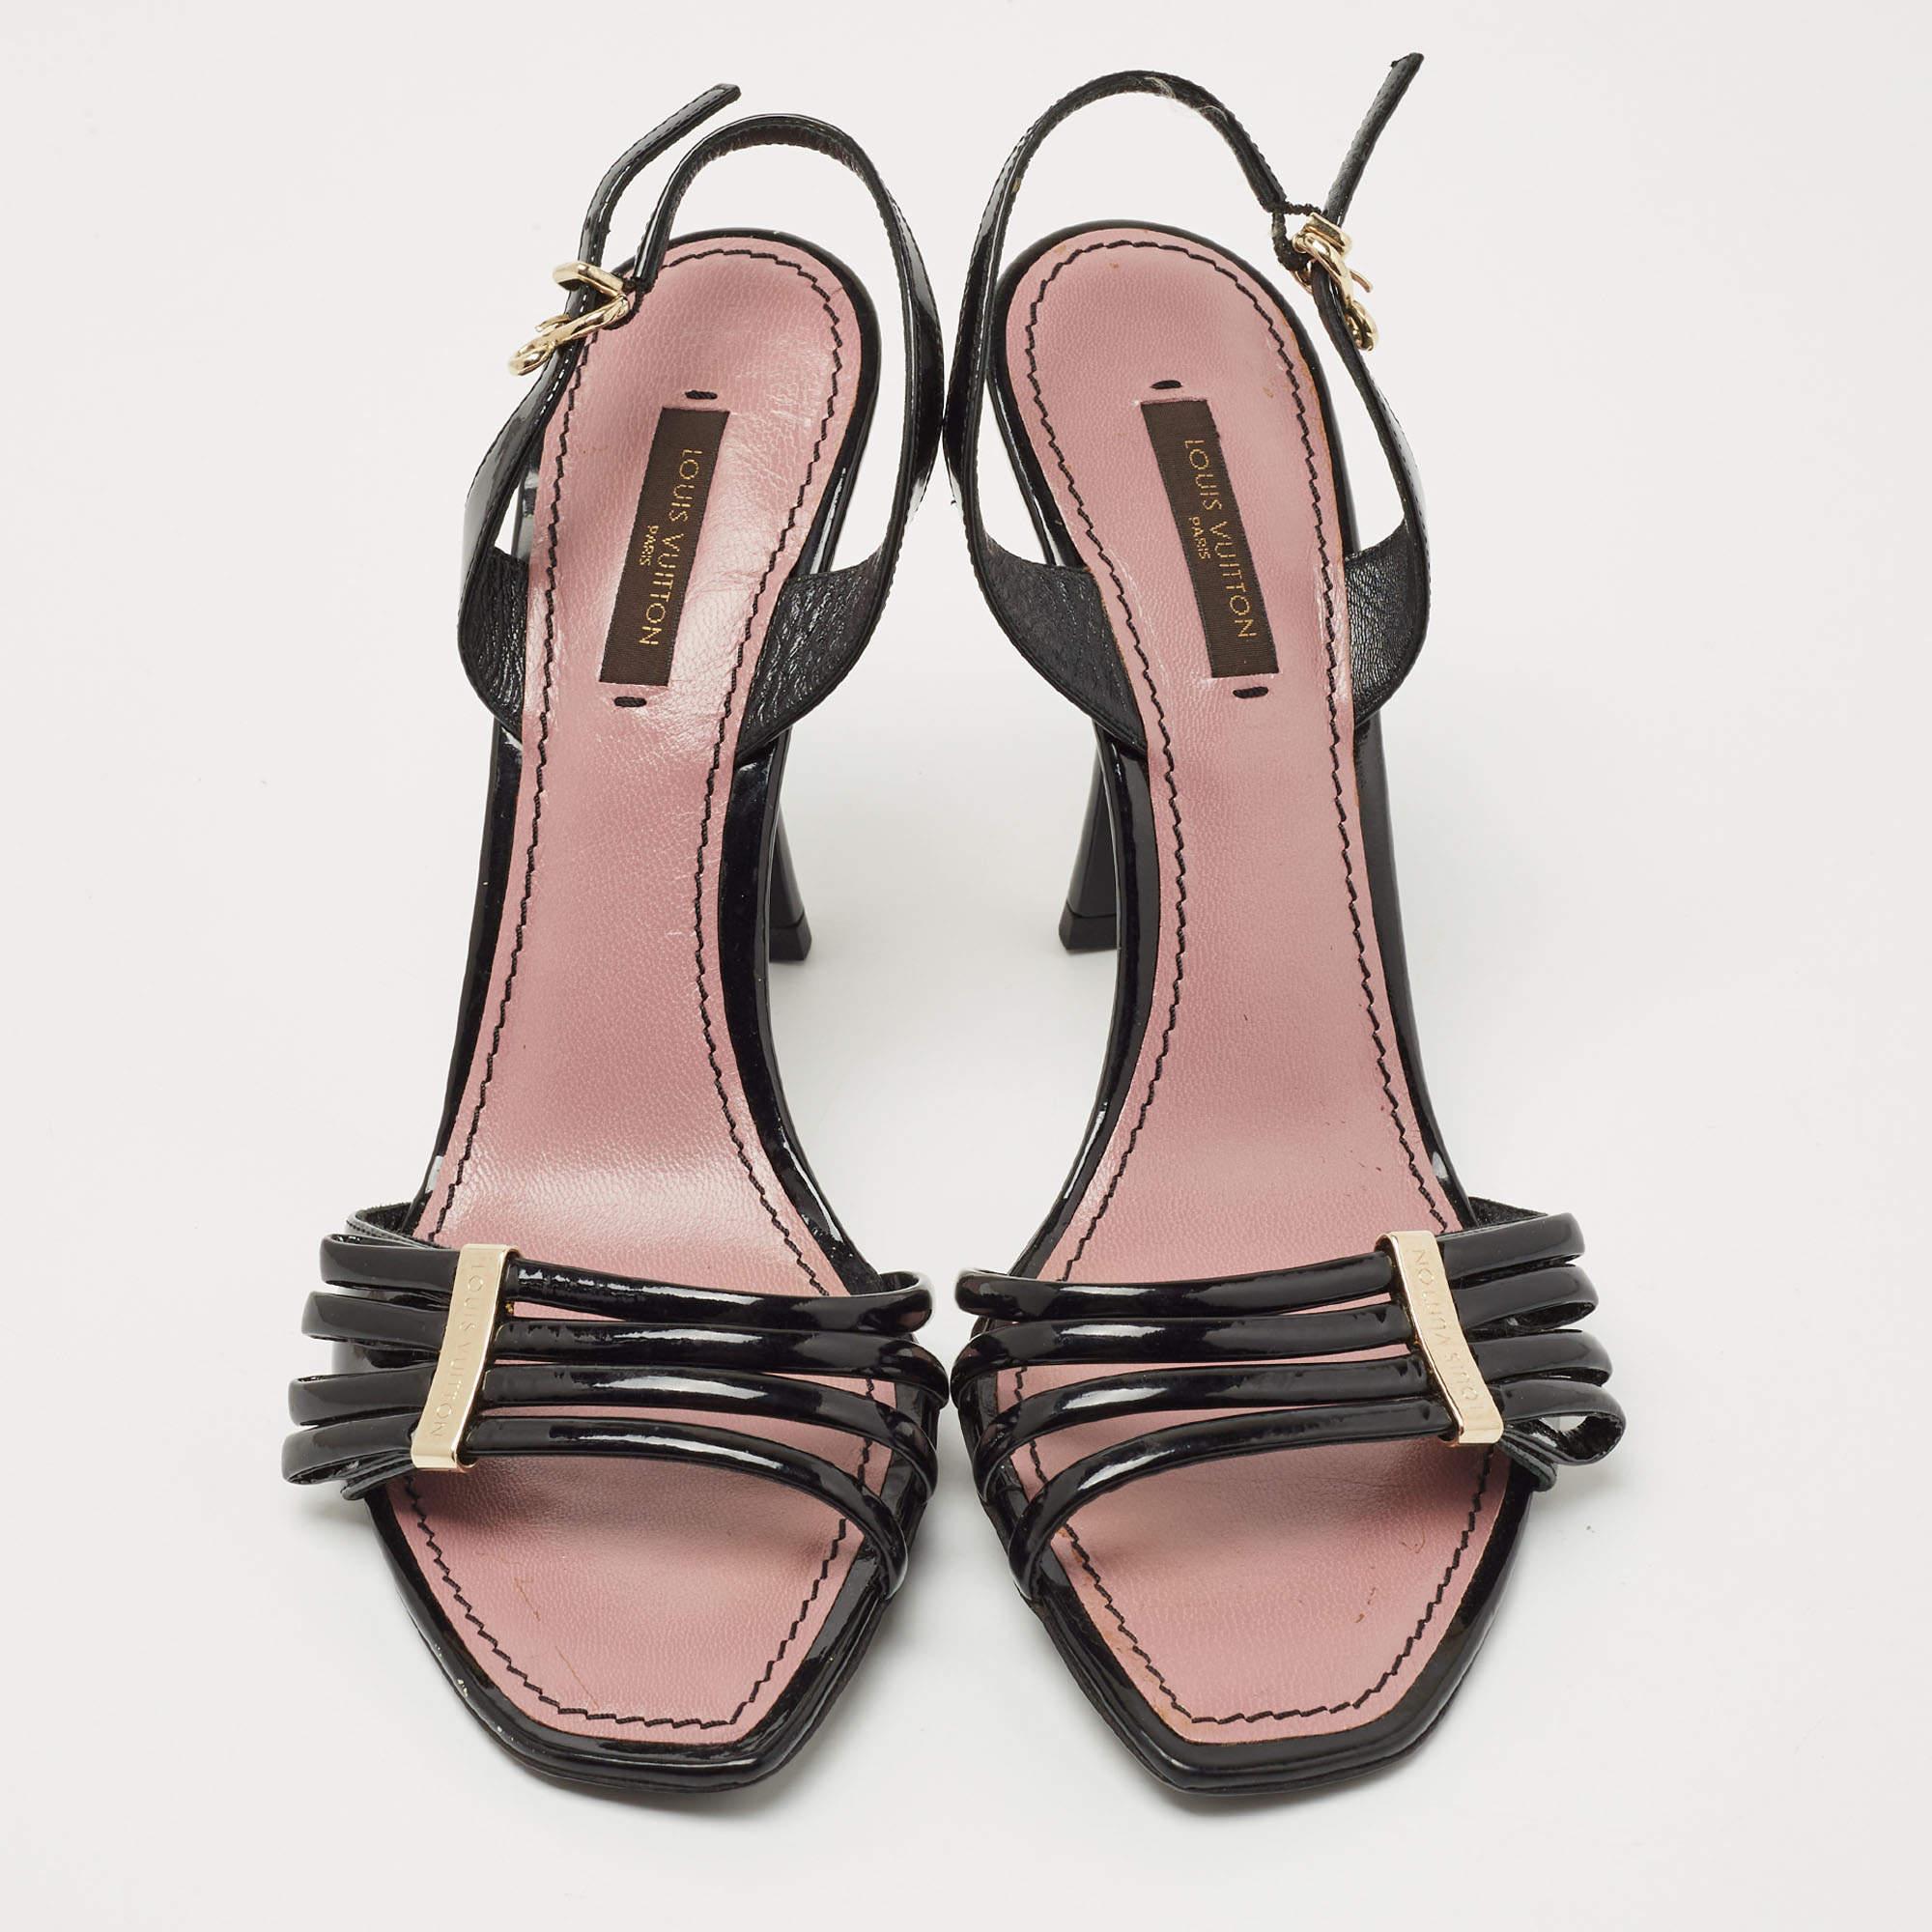 These sandals from Louis Vuitton are chic and super comfortable to use. They are created using patent leather on the exterior and come with gold-tone hardware, open toes, and an ankle buckle closure.

Includes: Original Dustbag, Original Box
